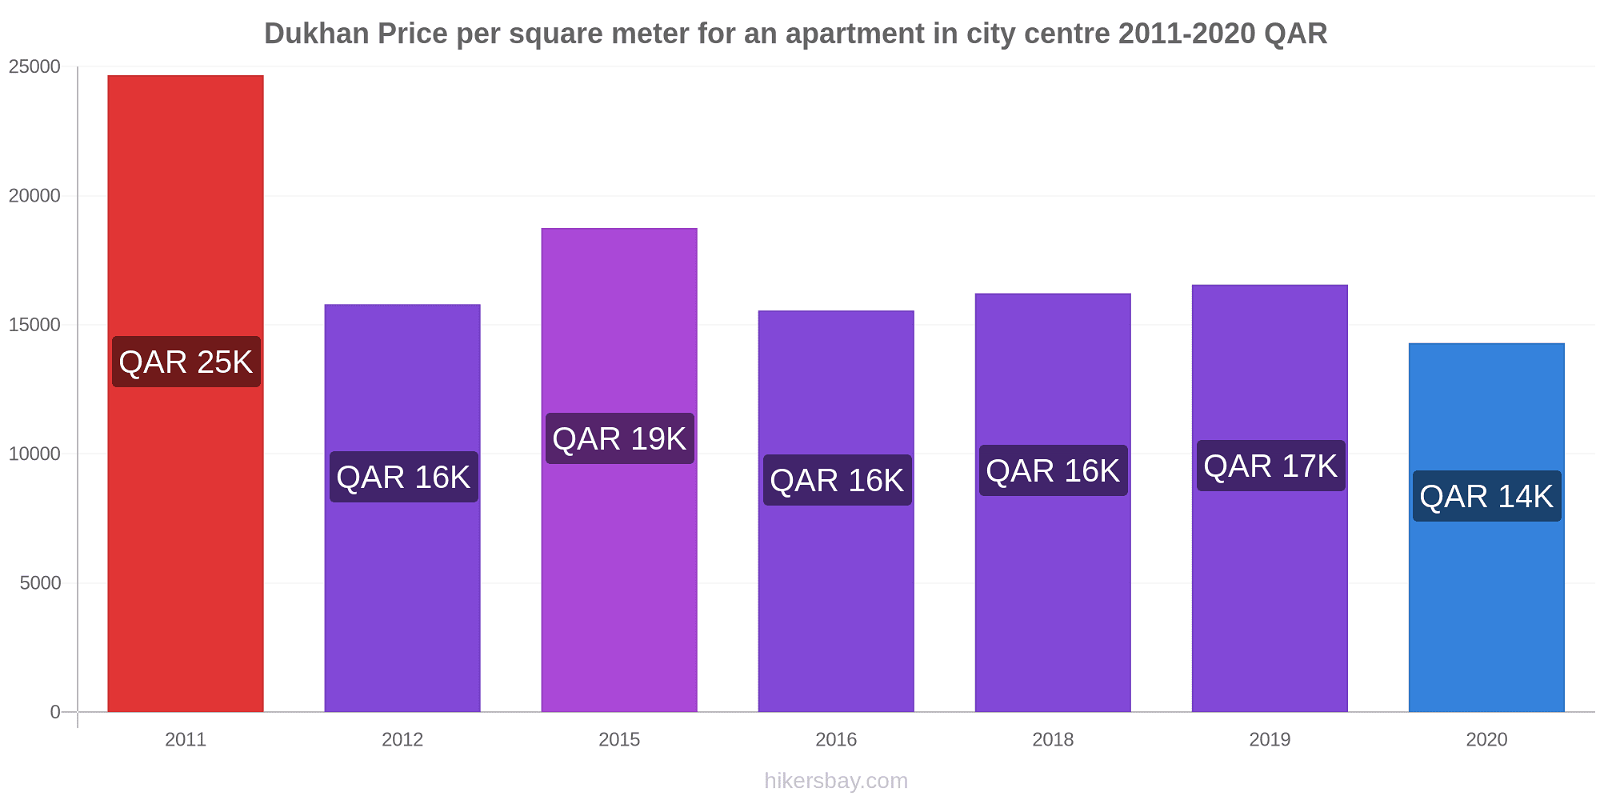 Dukhan price changes Price per square meter for an apartment in city centre hikersbay.com